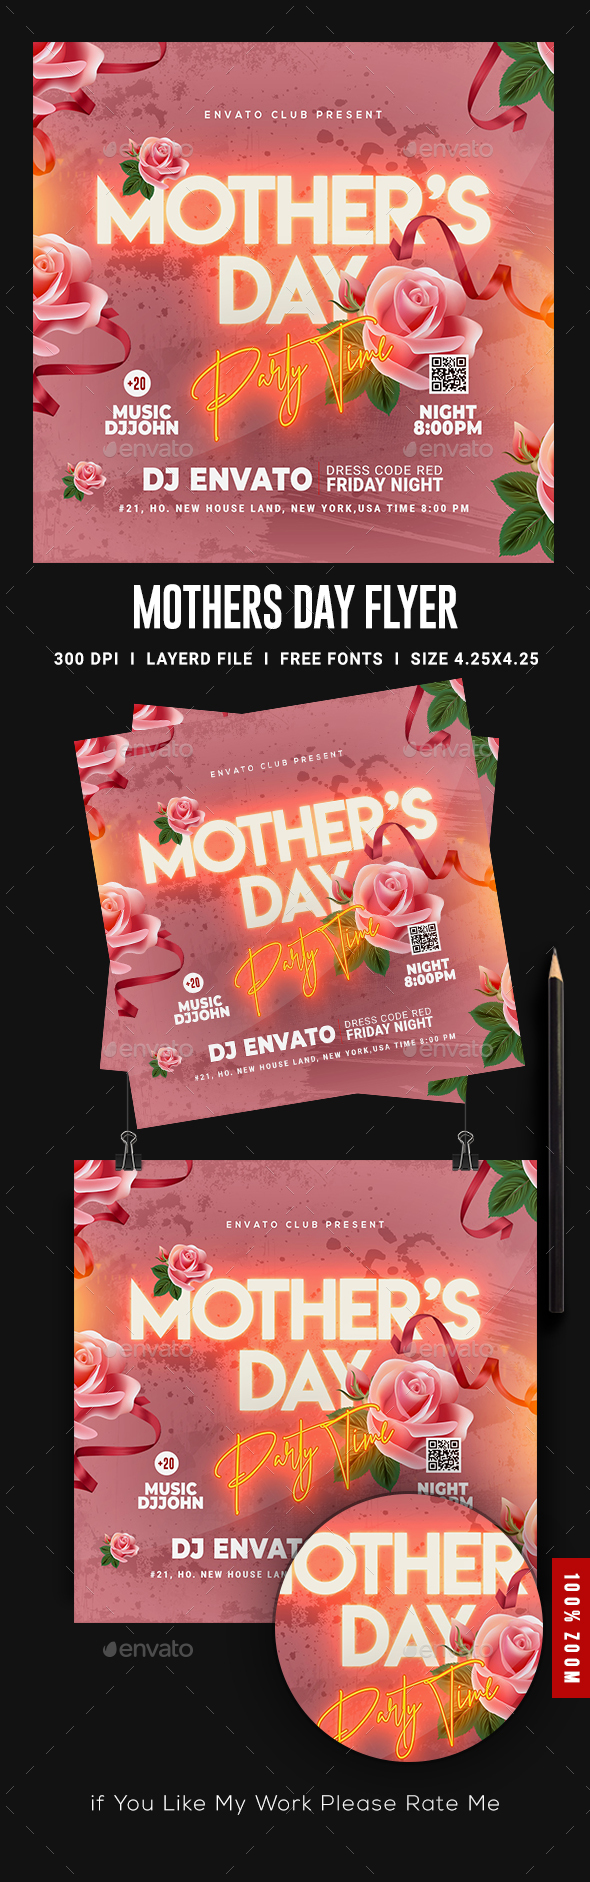 [DOWNLOAD]Mothers Day